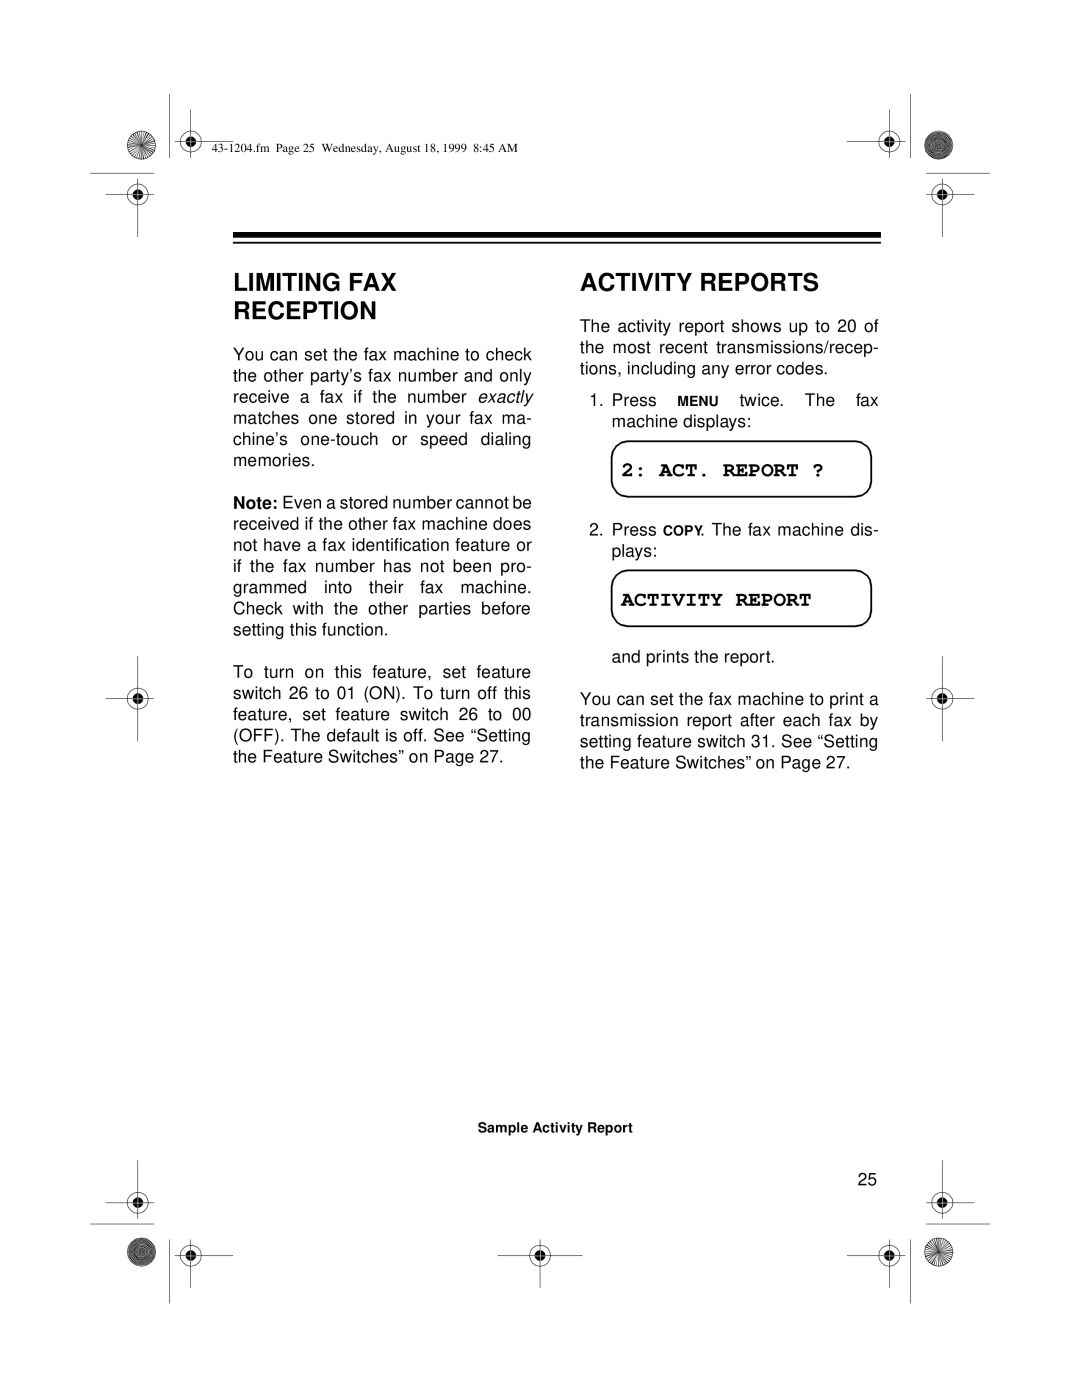 Radio Shack 43-1204 owner manual Limiting Fax Reception, Activity Reports, 2 ACT. REPORT ? 